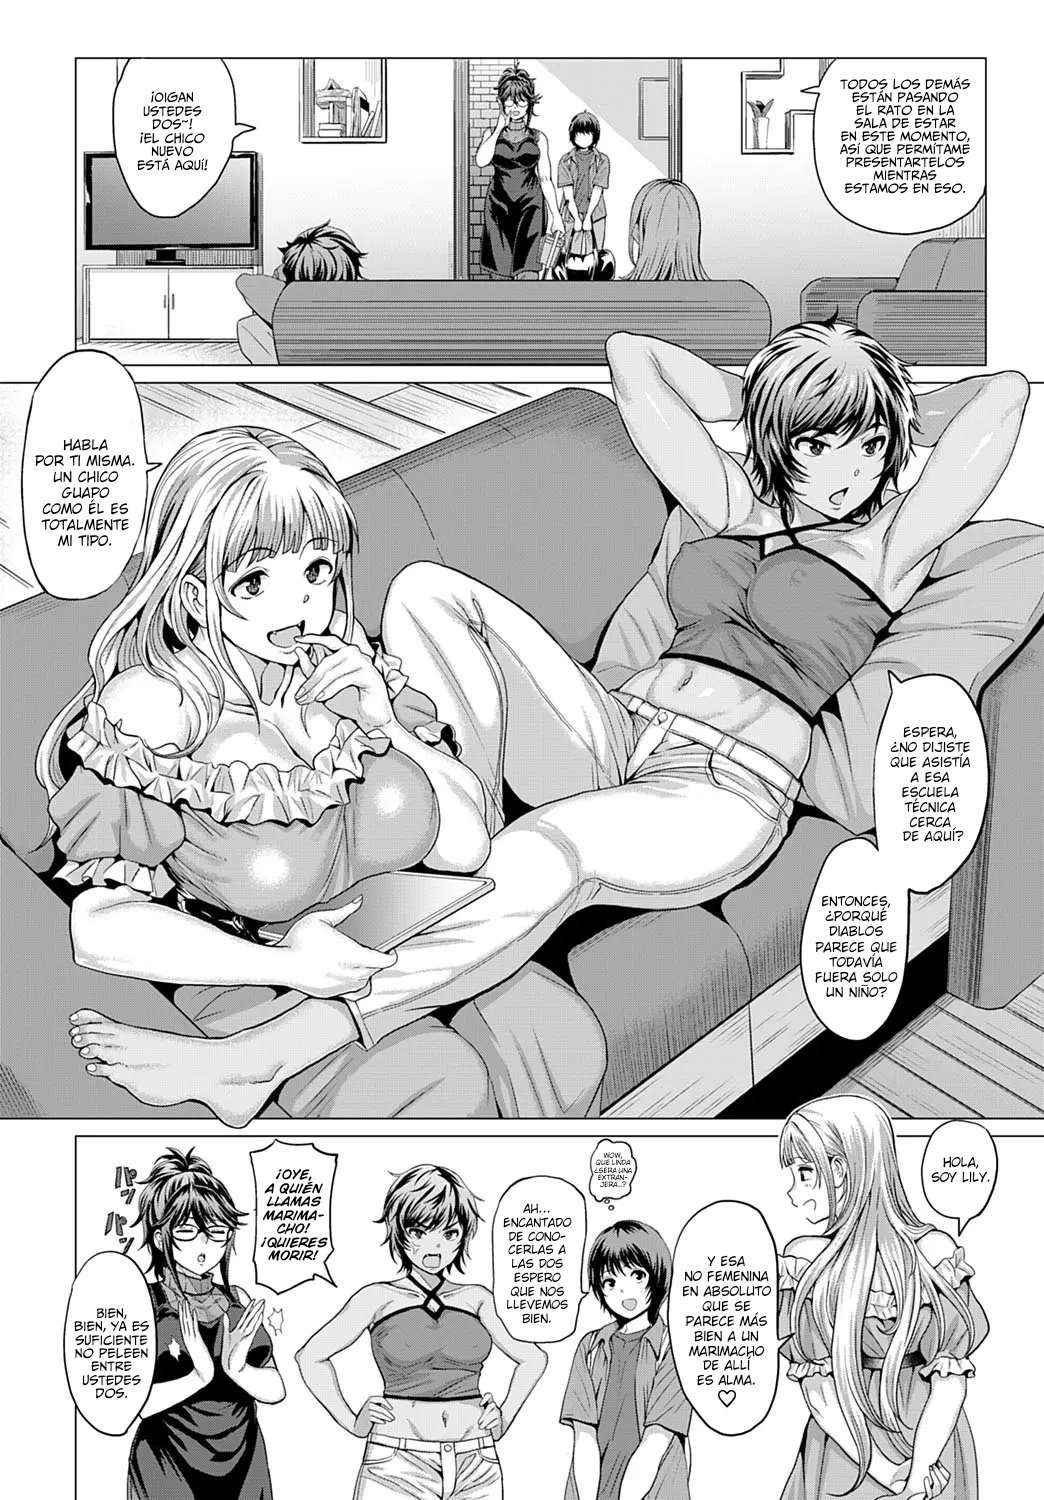 Succubus Share House e Youkoso! - Welcome to the Succubus Shared House! - 1